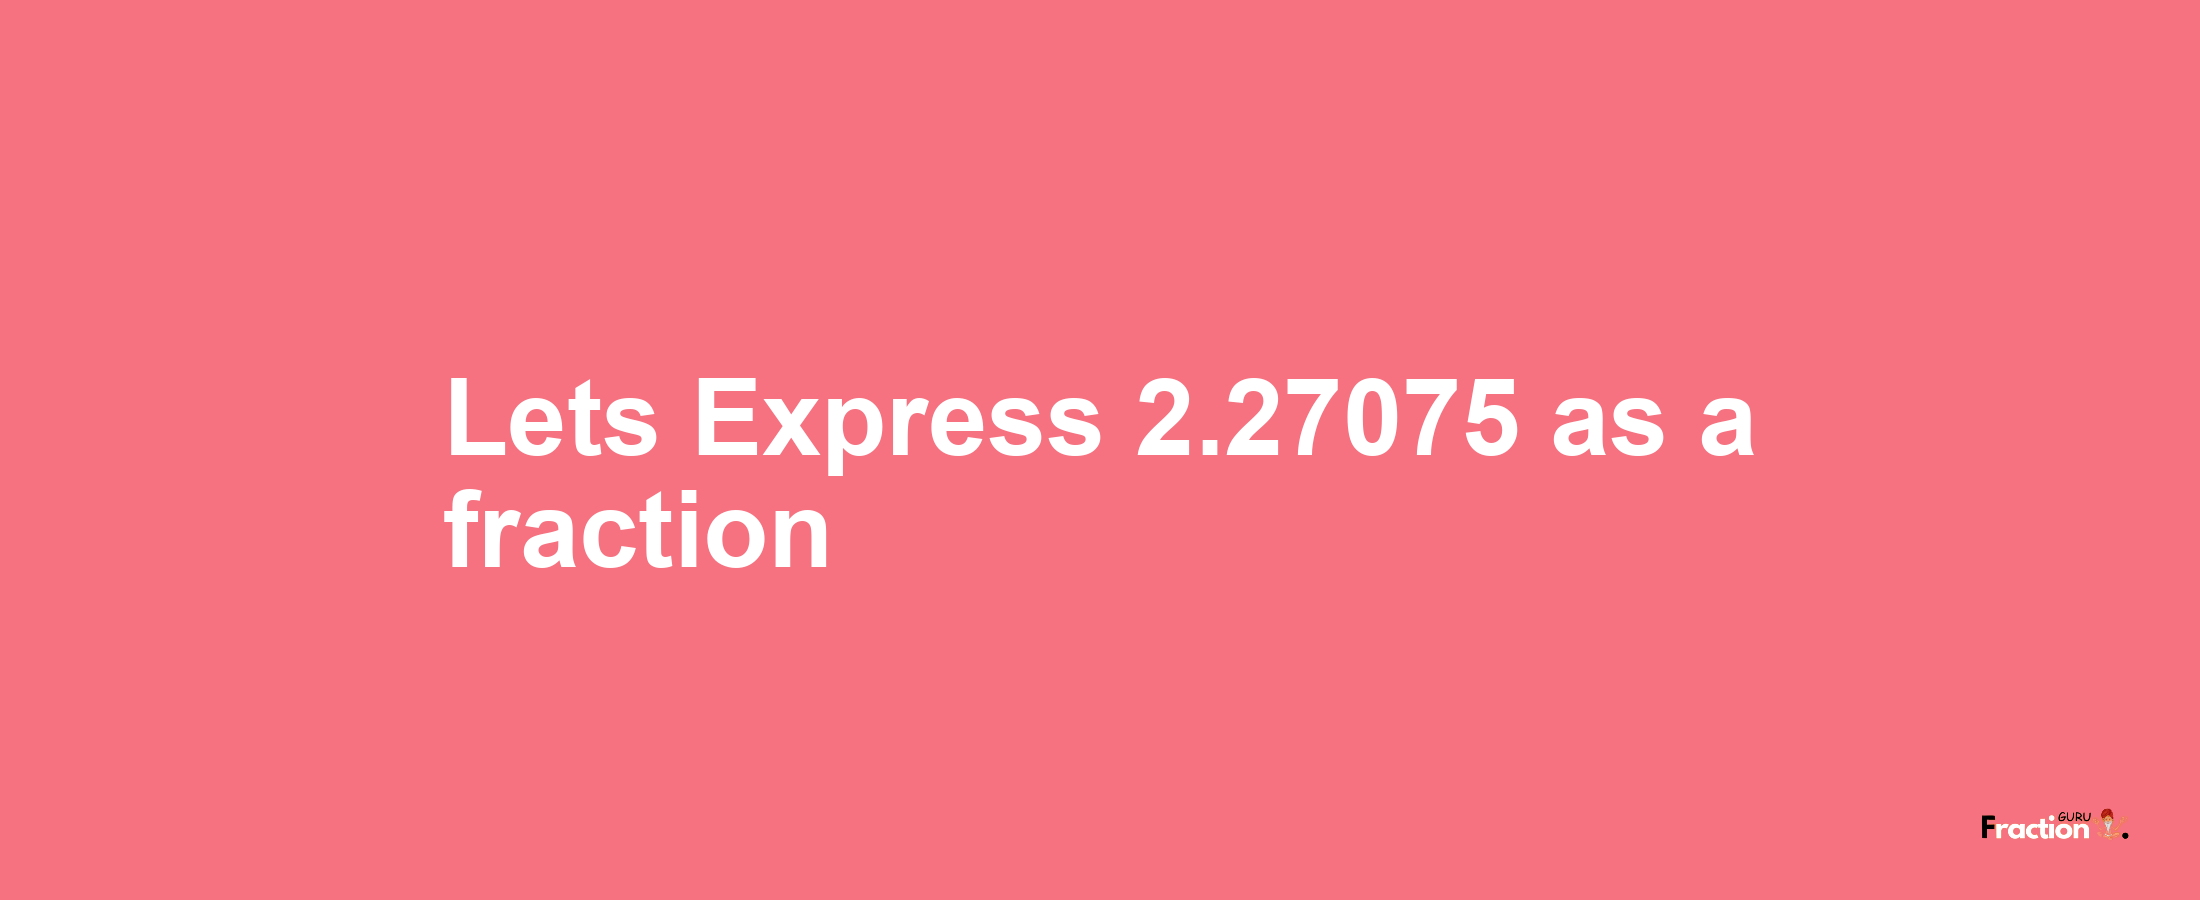 Lets Express 2.27075 as afraction